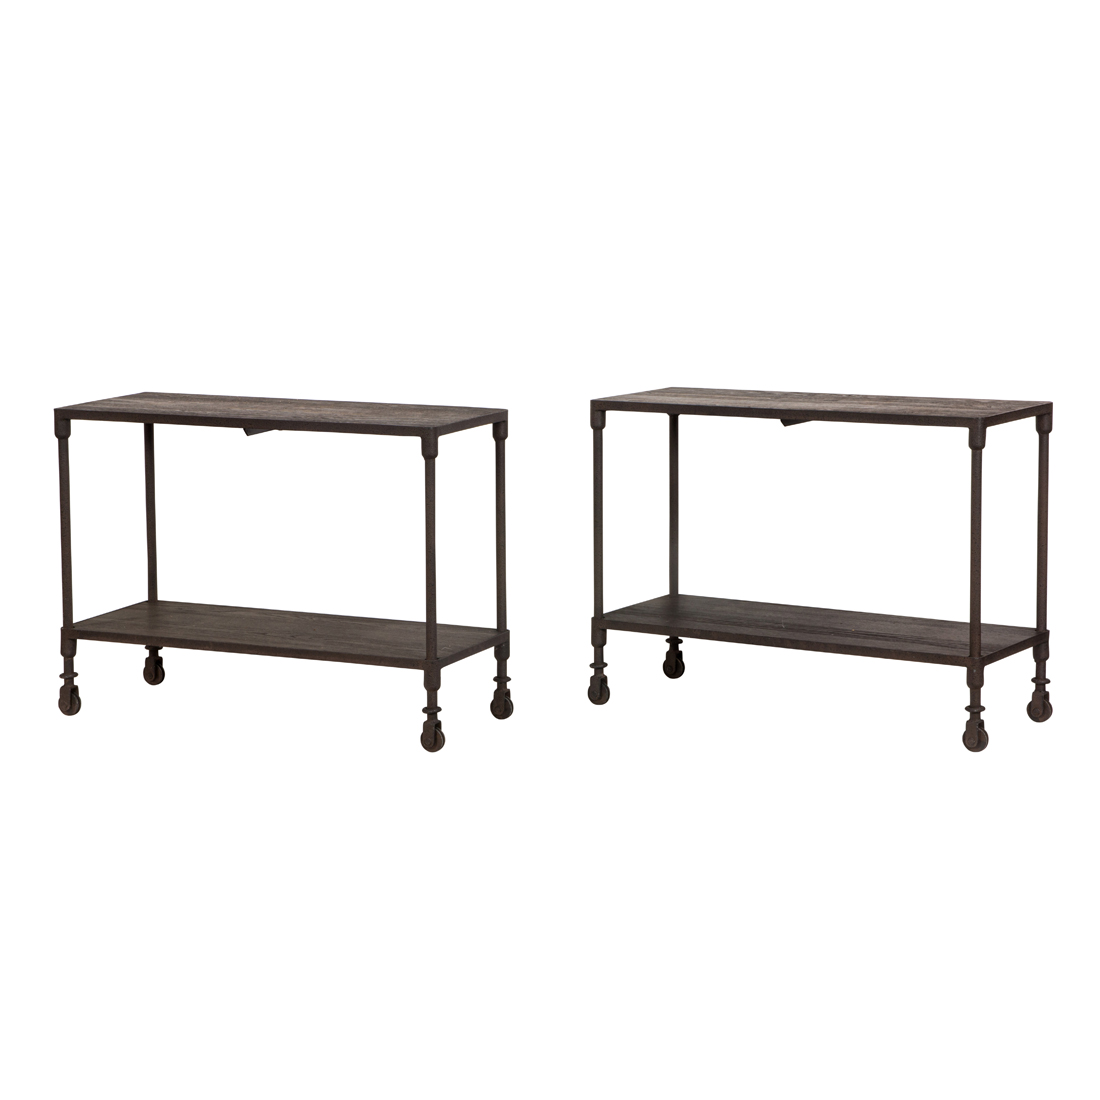 A PAIR OF INDUSTRIAL STYLE TIERED 3cdb14